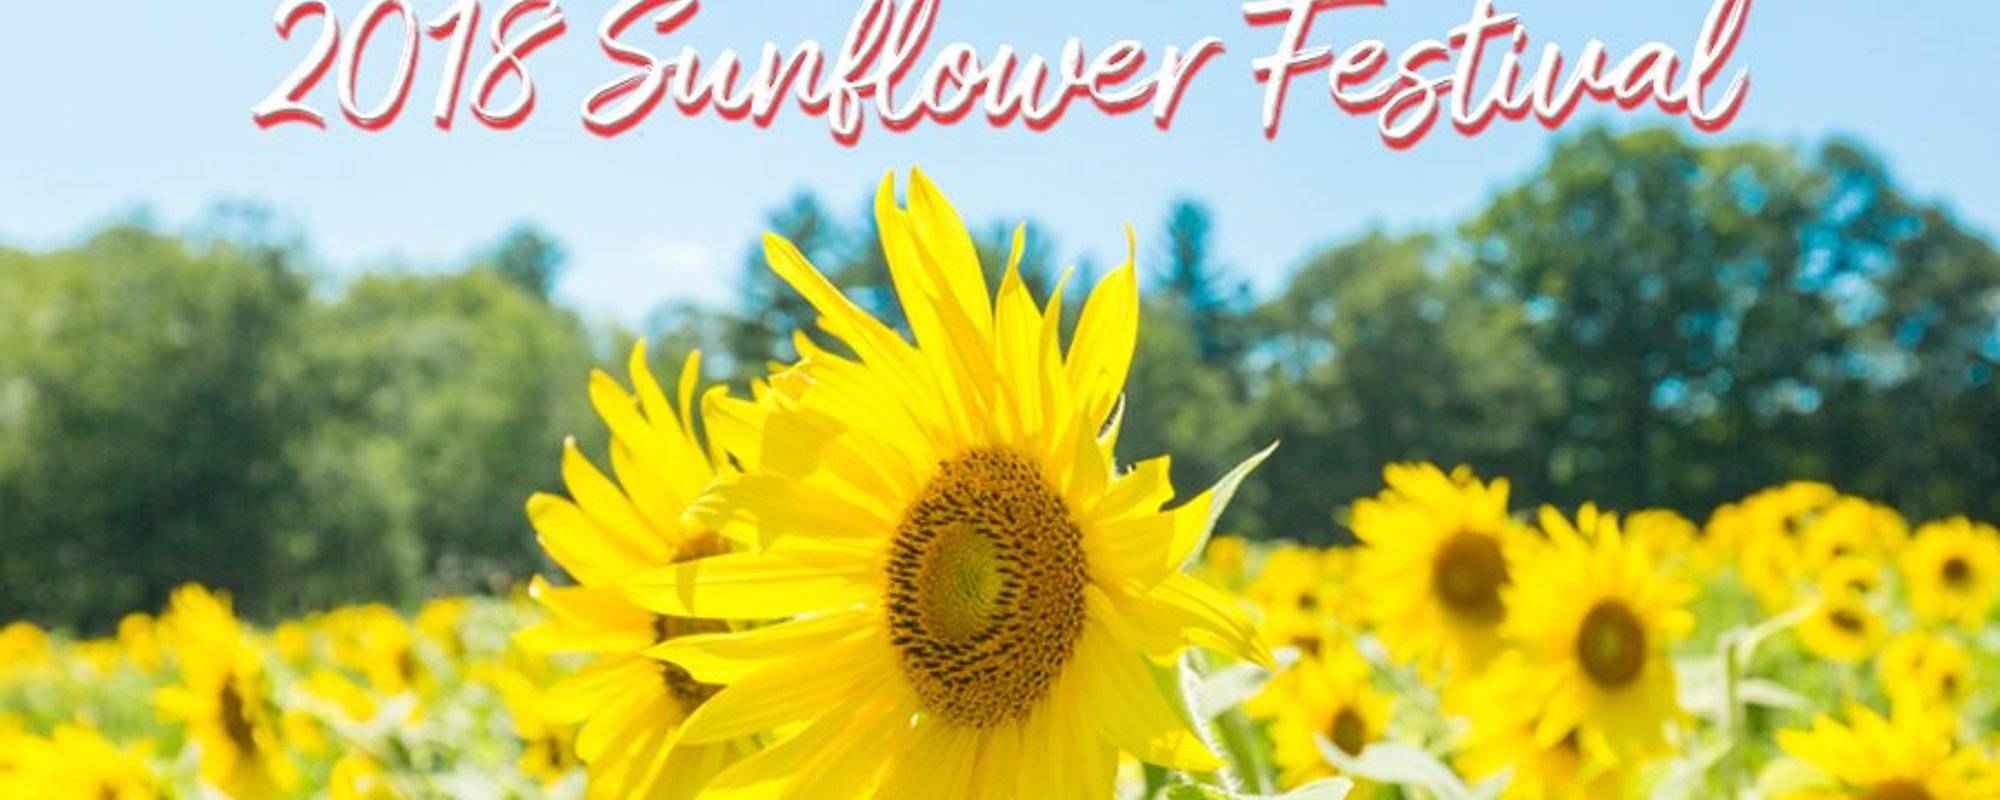 A Trip to the 2018 Sunflower Festival